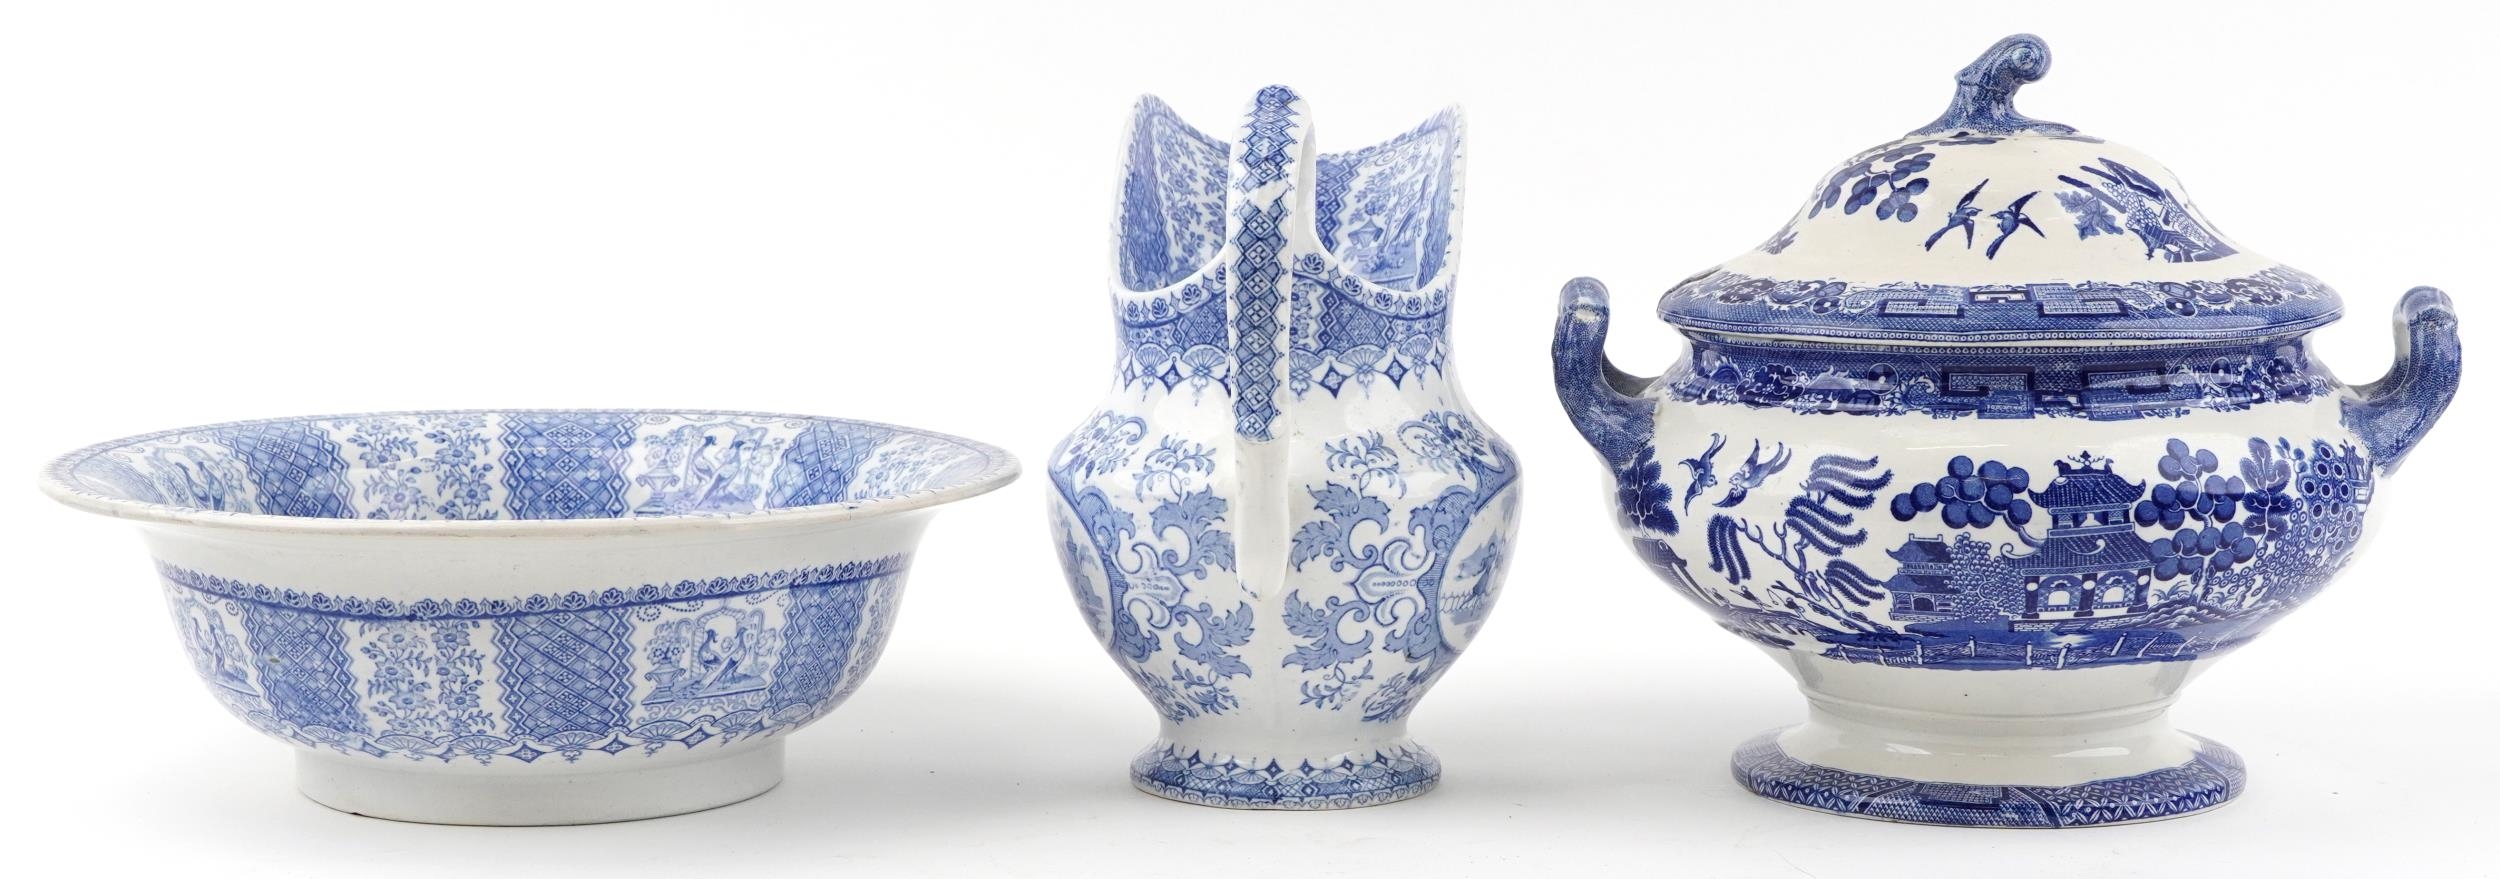 Victorian blue and white wash jug and basin, transfer printed in the Tyrolienne pattern and a - Image 6 of 10